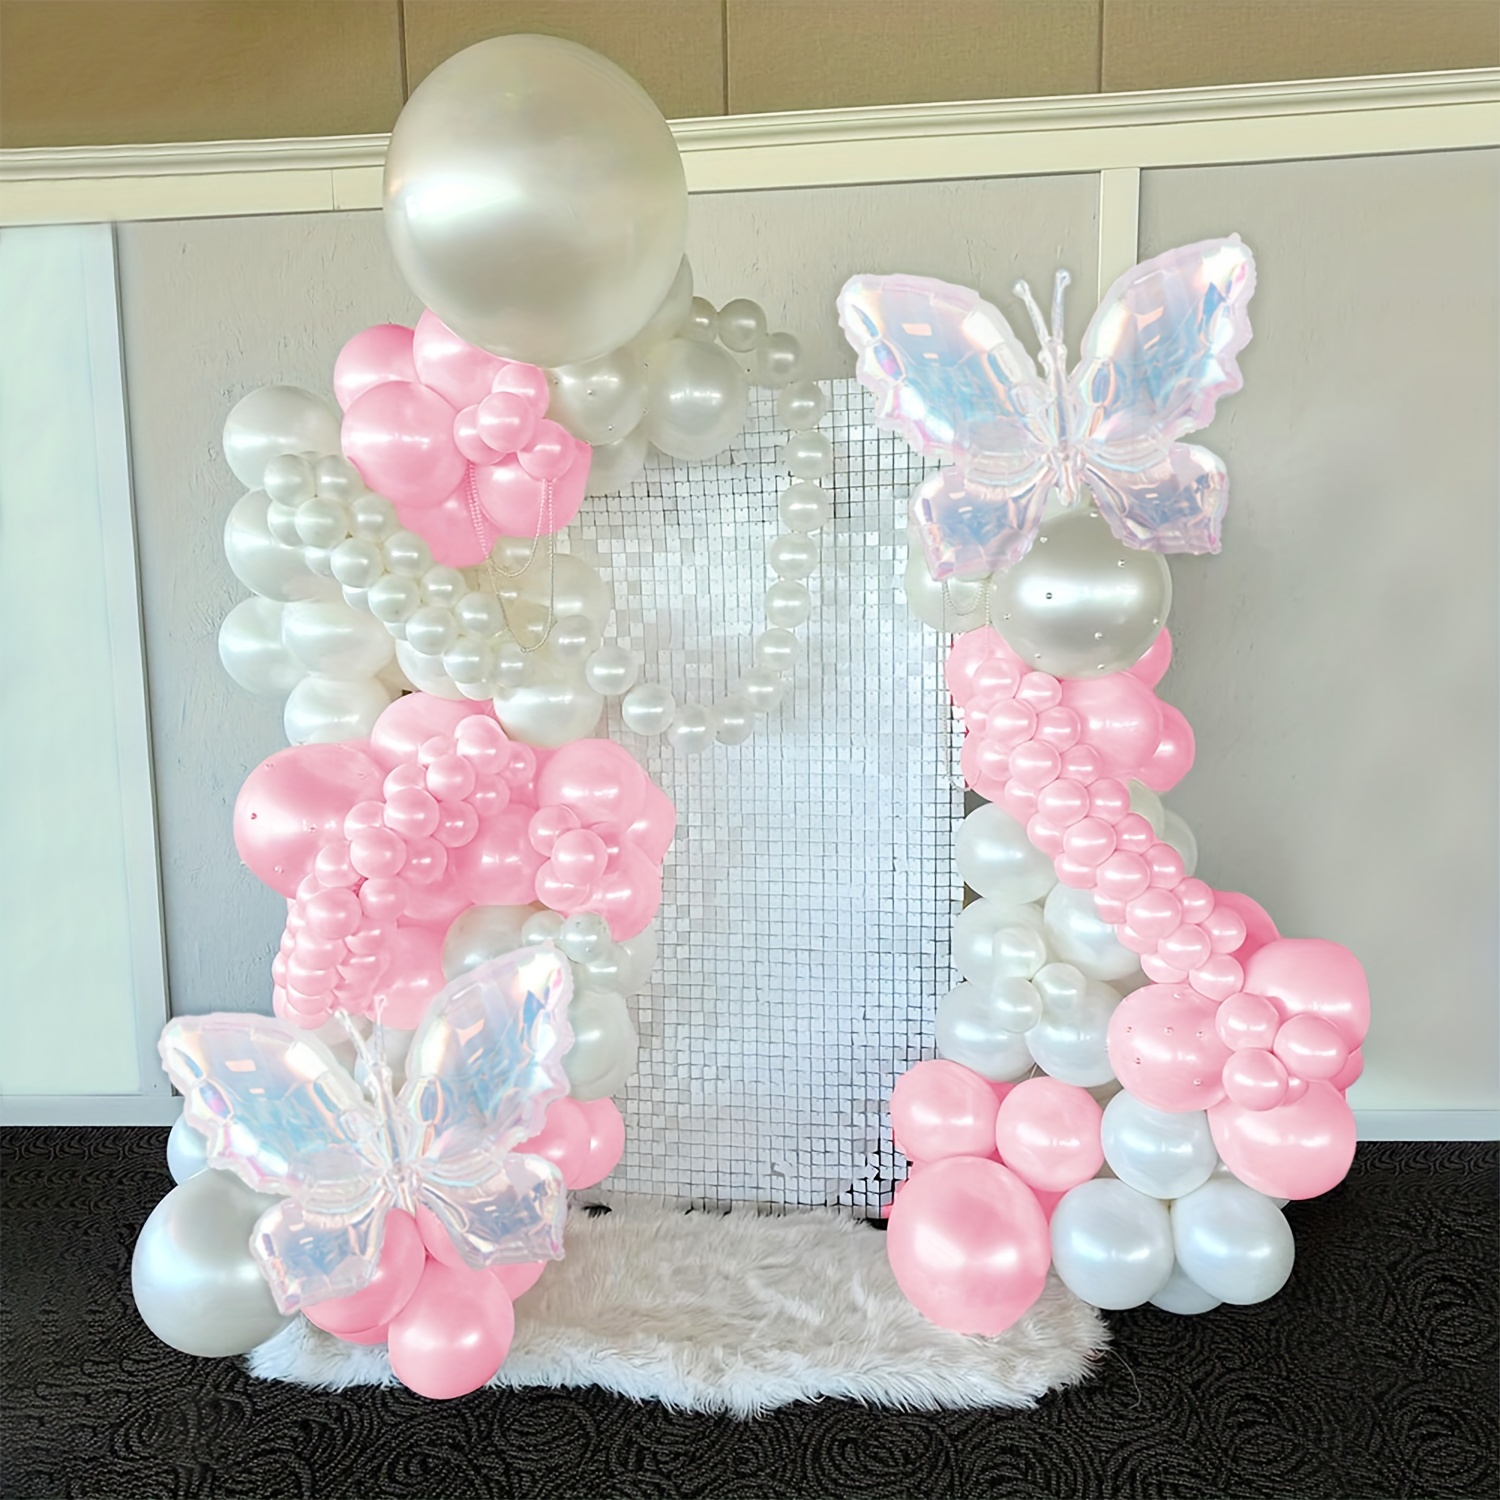 

162pcs Pearl White & Blush Pink Balloon Arch Set With Iridescent Butterfly Decorations - Perfect For Valentine's Day, Bohemian Parties, Bridal Showers, Birthdays, And Wedding Gift Openings